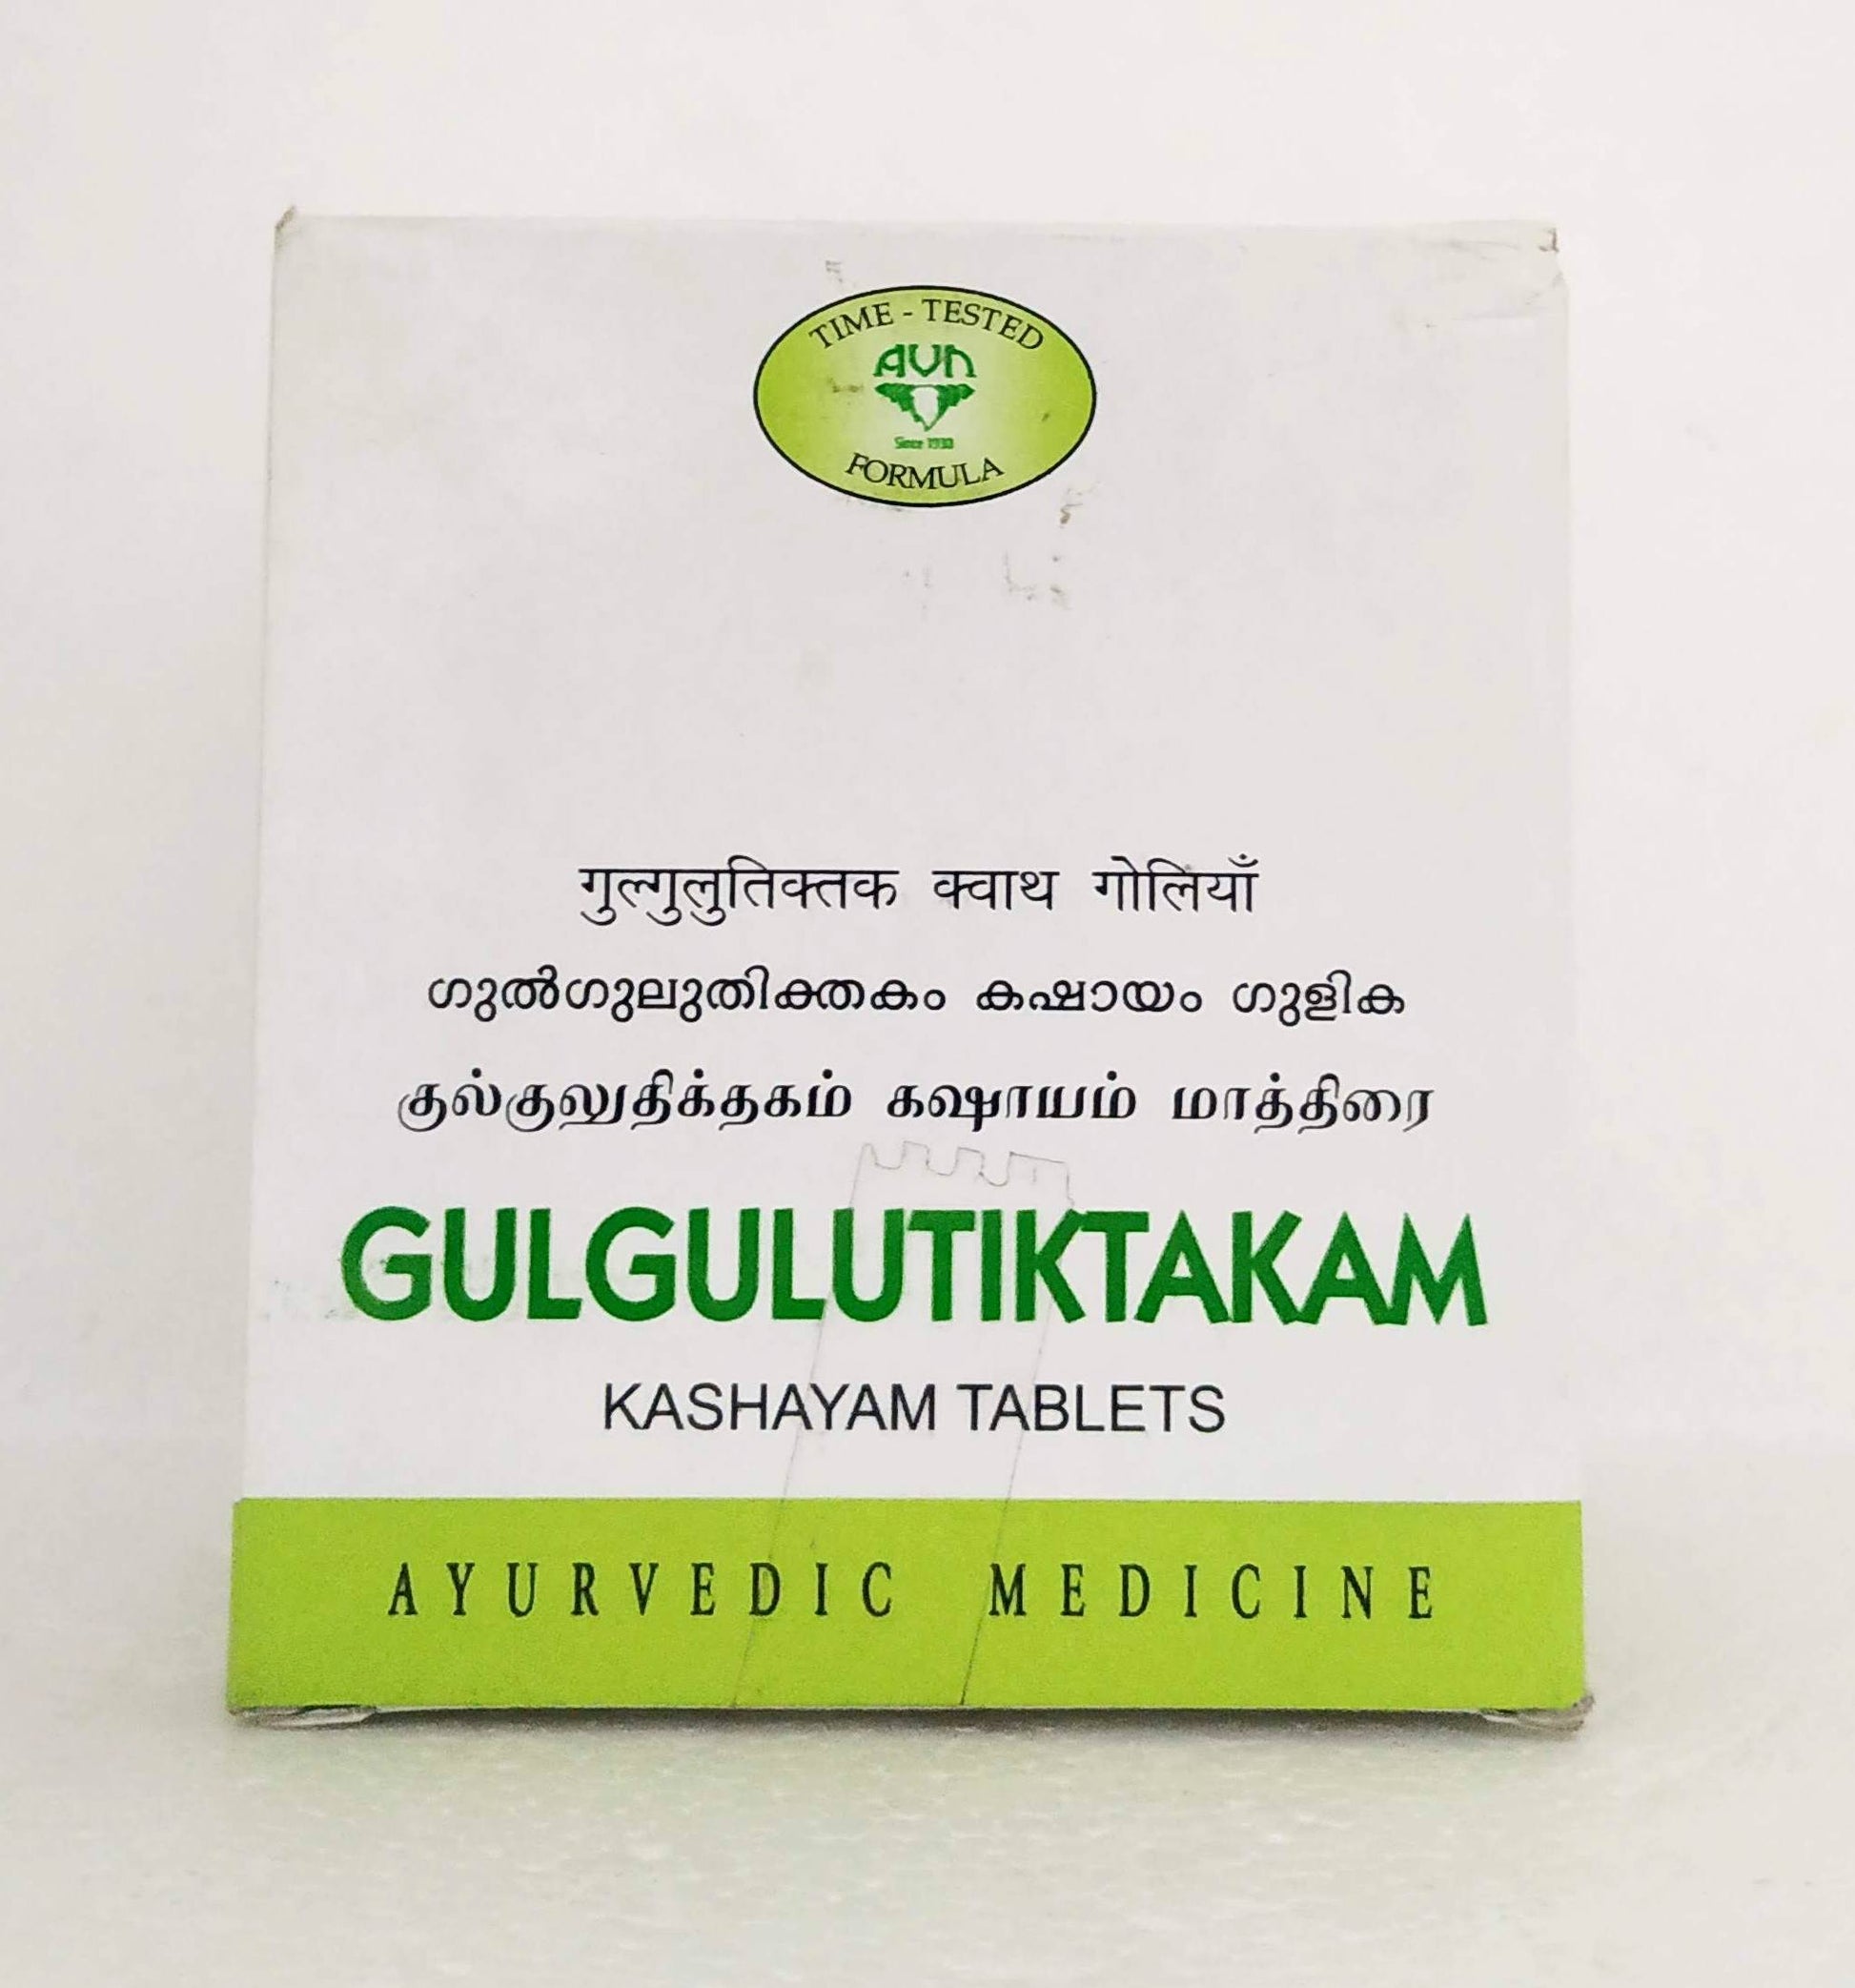 Shop Gulguluthiktakam Kashayam Tablets - 10Tablets at price 60.00 from AVN Online - Ayush Care